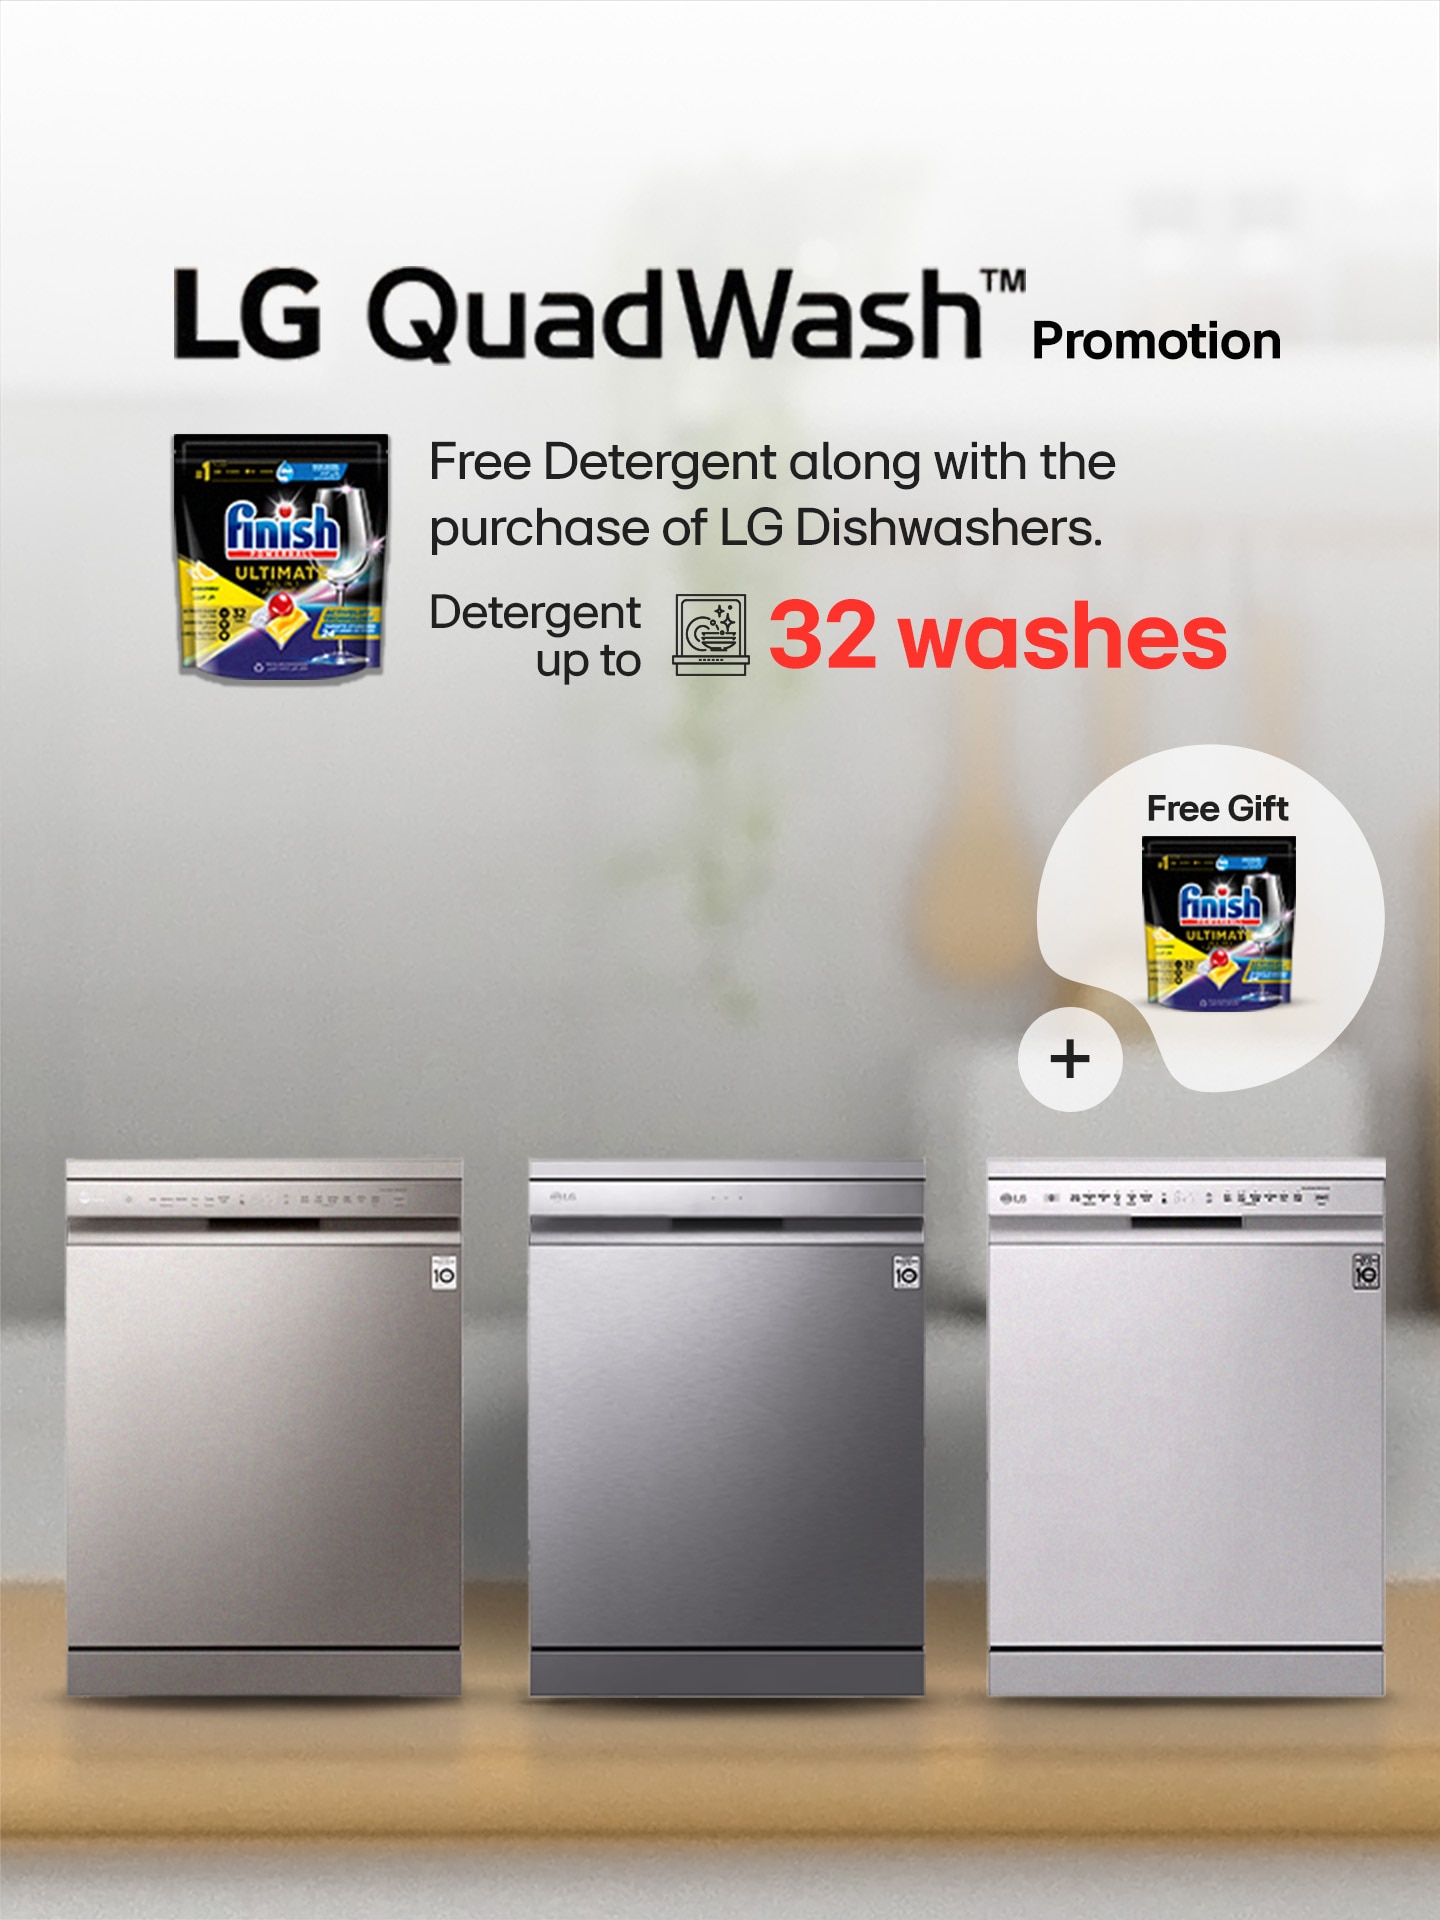 LG Quad Wash TM Promotion, Free Detergent along with the purchase of LG Dishwashers . Detergent up to 32 Washes